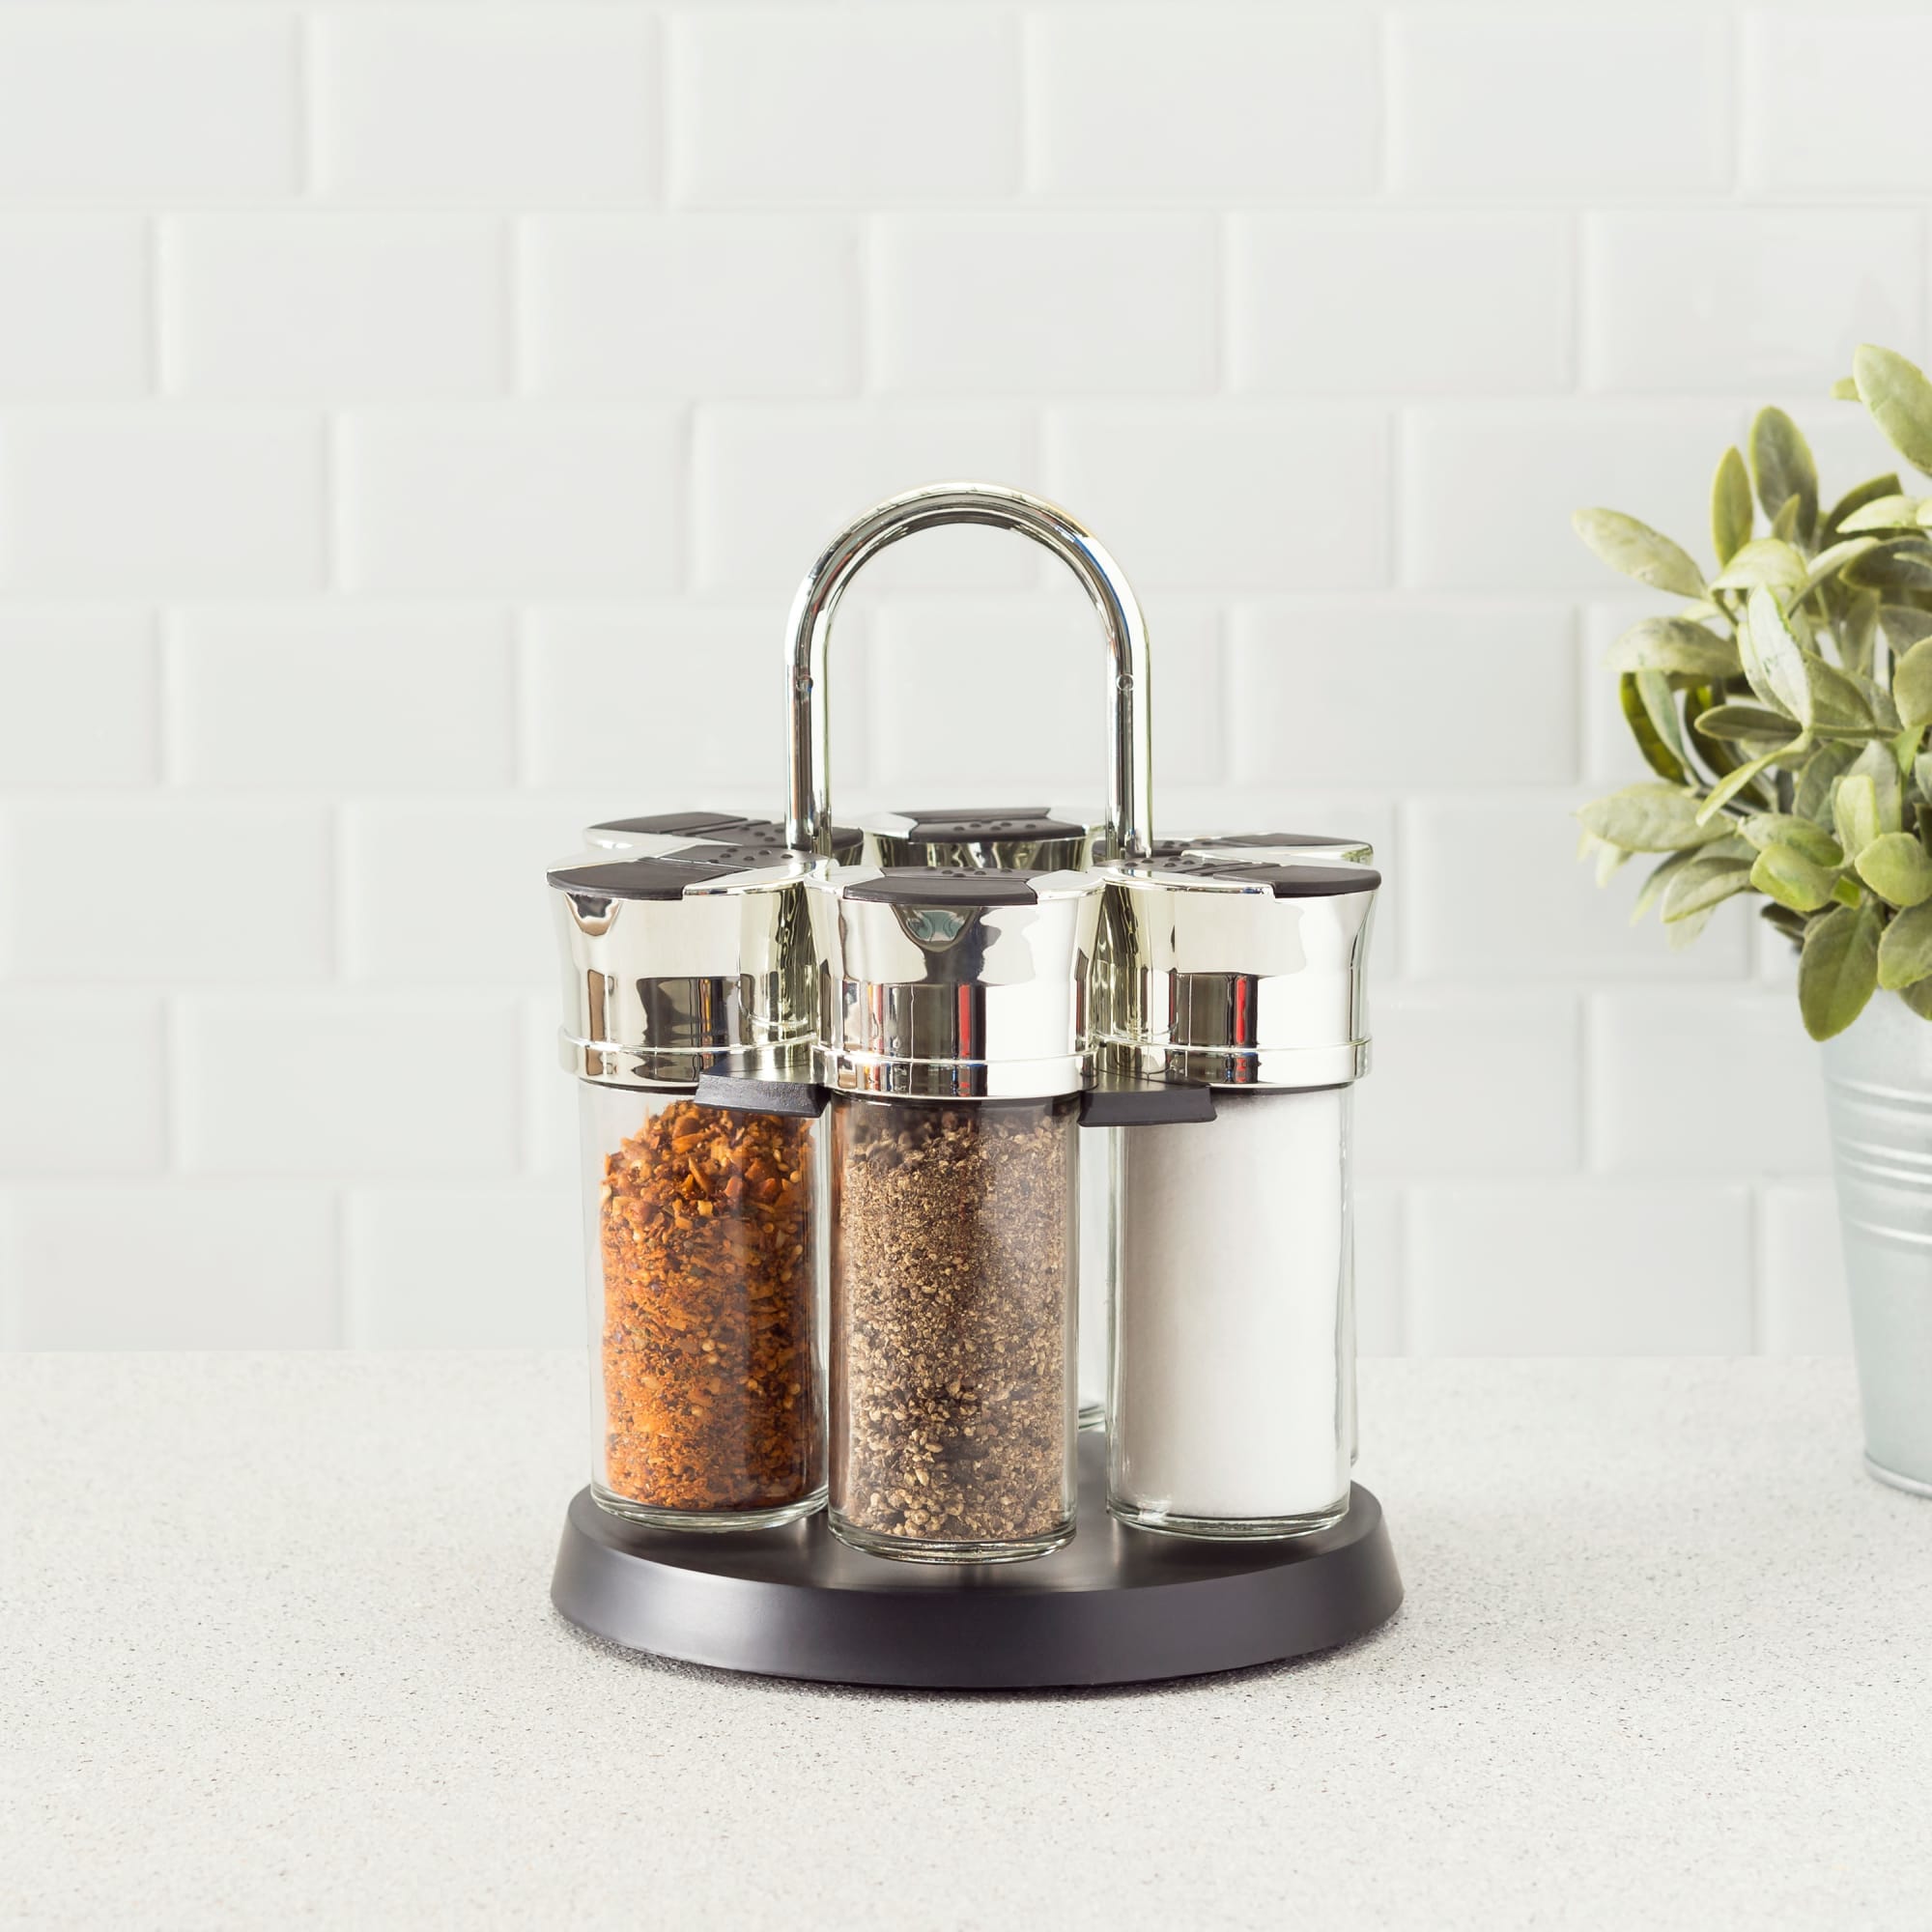 Home Basics Compact Carousel 6-Jar Spice Rack with Steel Carrying Handle, Black $12.00 EACH, CASE PACK OF 12